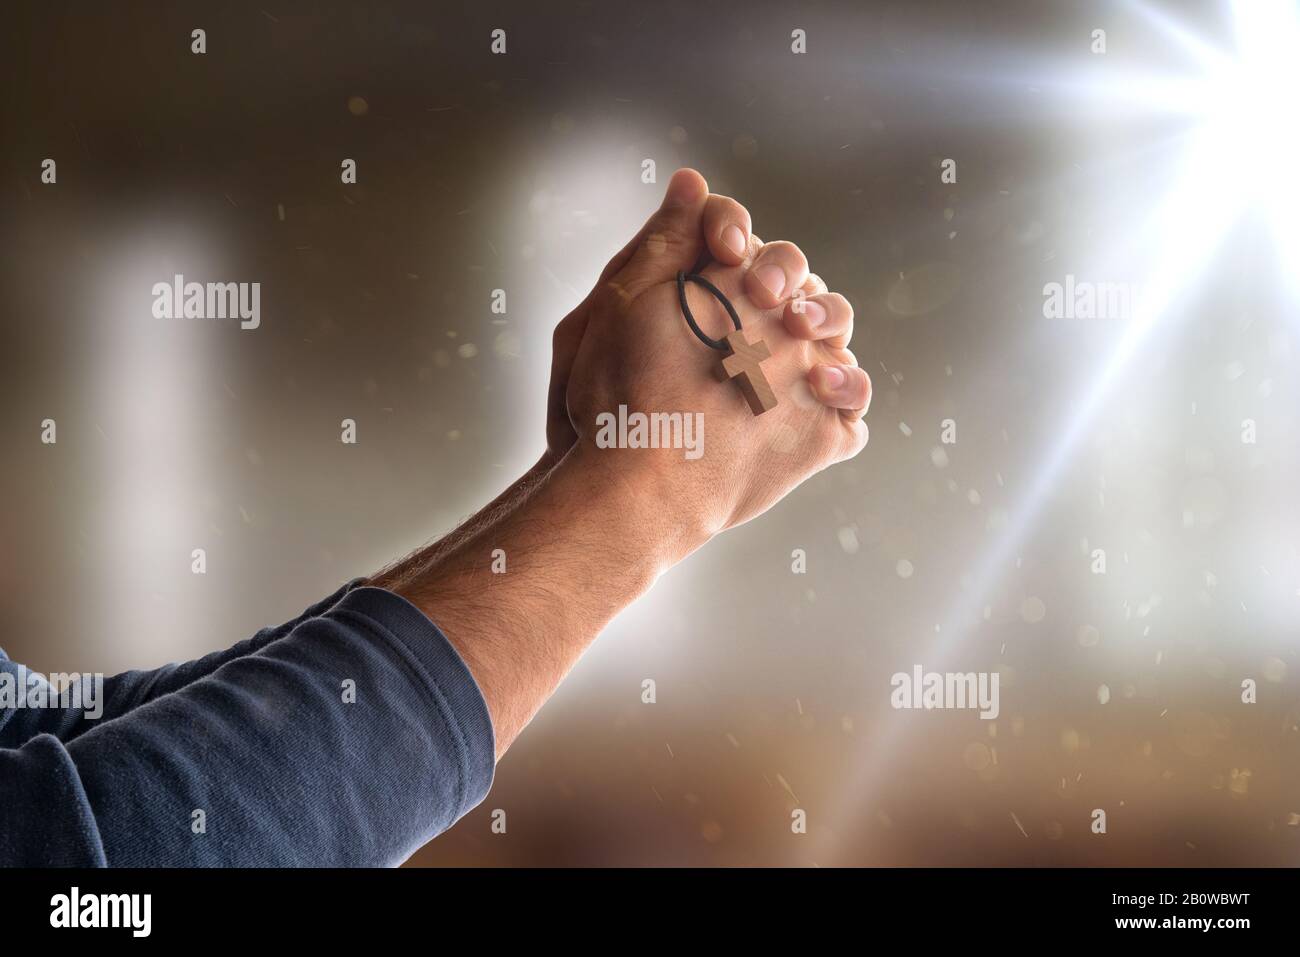 Man praying in church with his hands closed and with pendant with cross symbol in his hand and flash. Horizontal composition Stock Photo